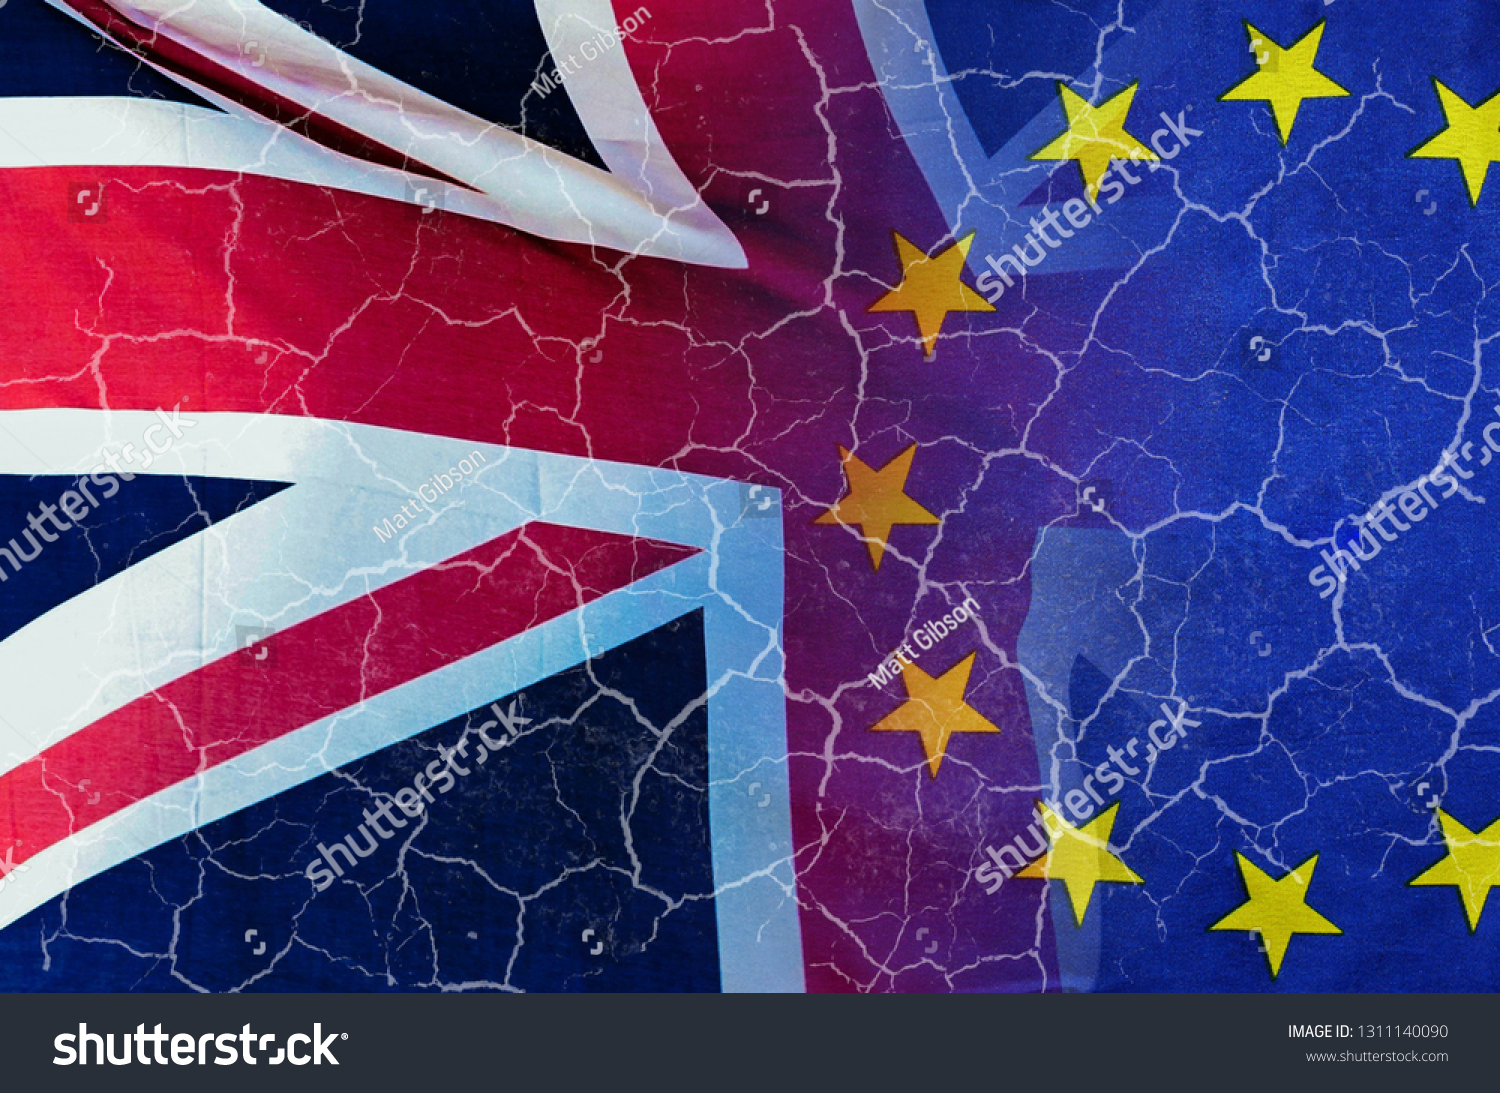 No Deal Brexit concept image of cracks over image of London with UK and EU flags in image #1311140090